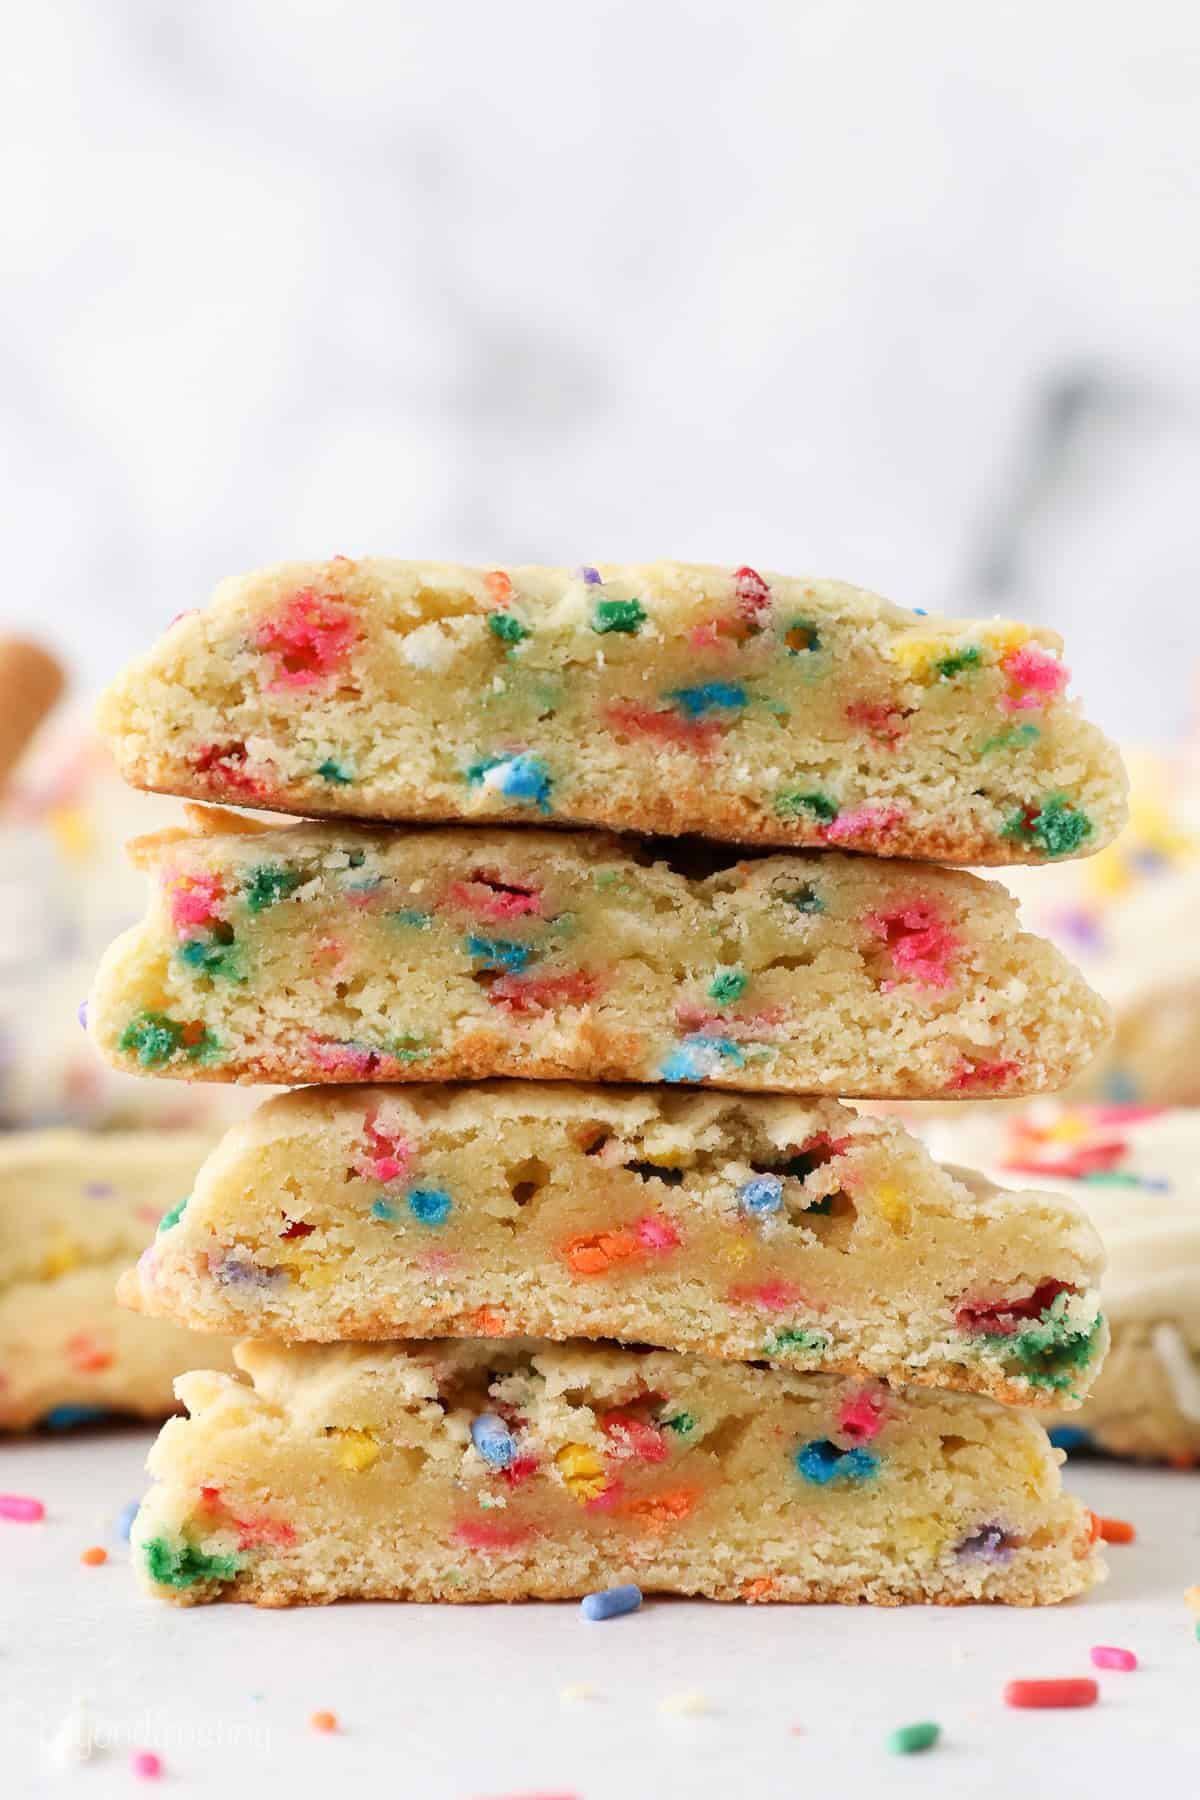 A stack of funfetti cookies cut in half to reveal the cakey interiors.